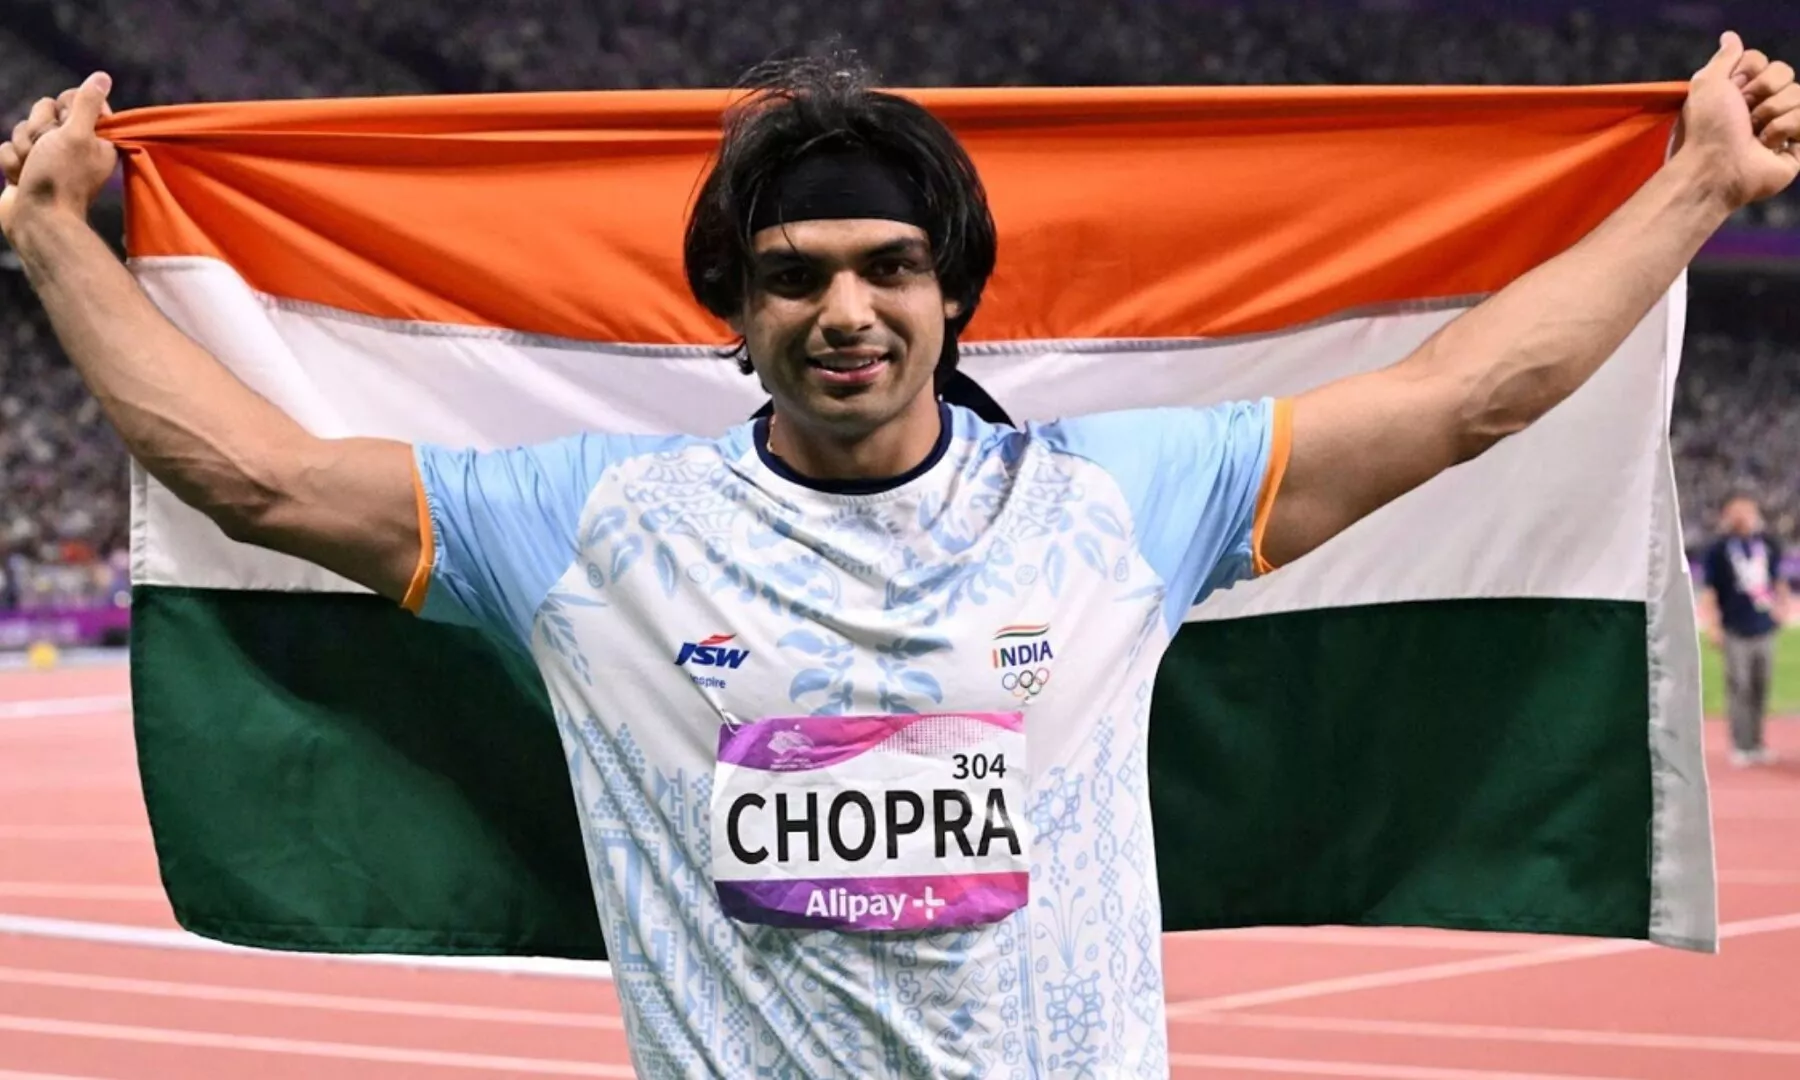 Report: Neeraj Chopra to train in South Africa, Mathias Boe’s tenure extended in build up to Paris Olympics